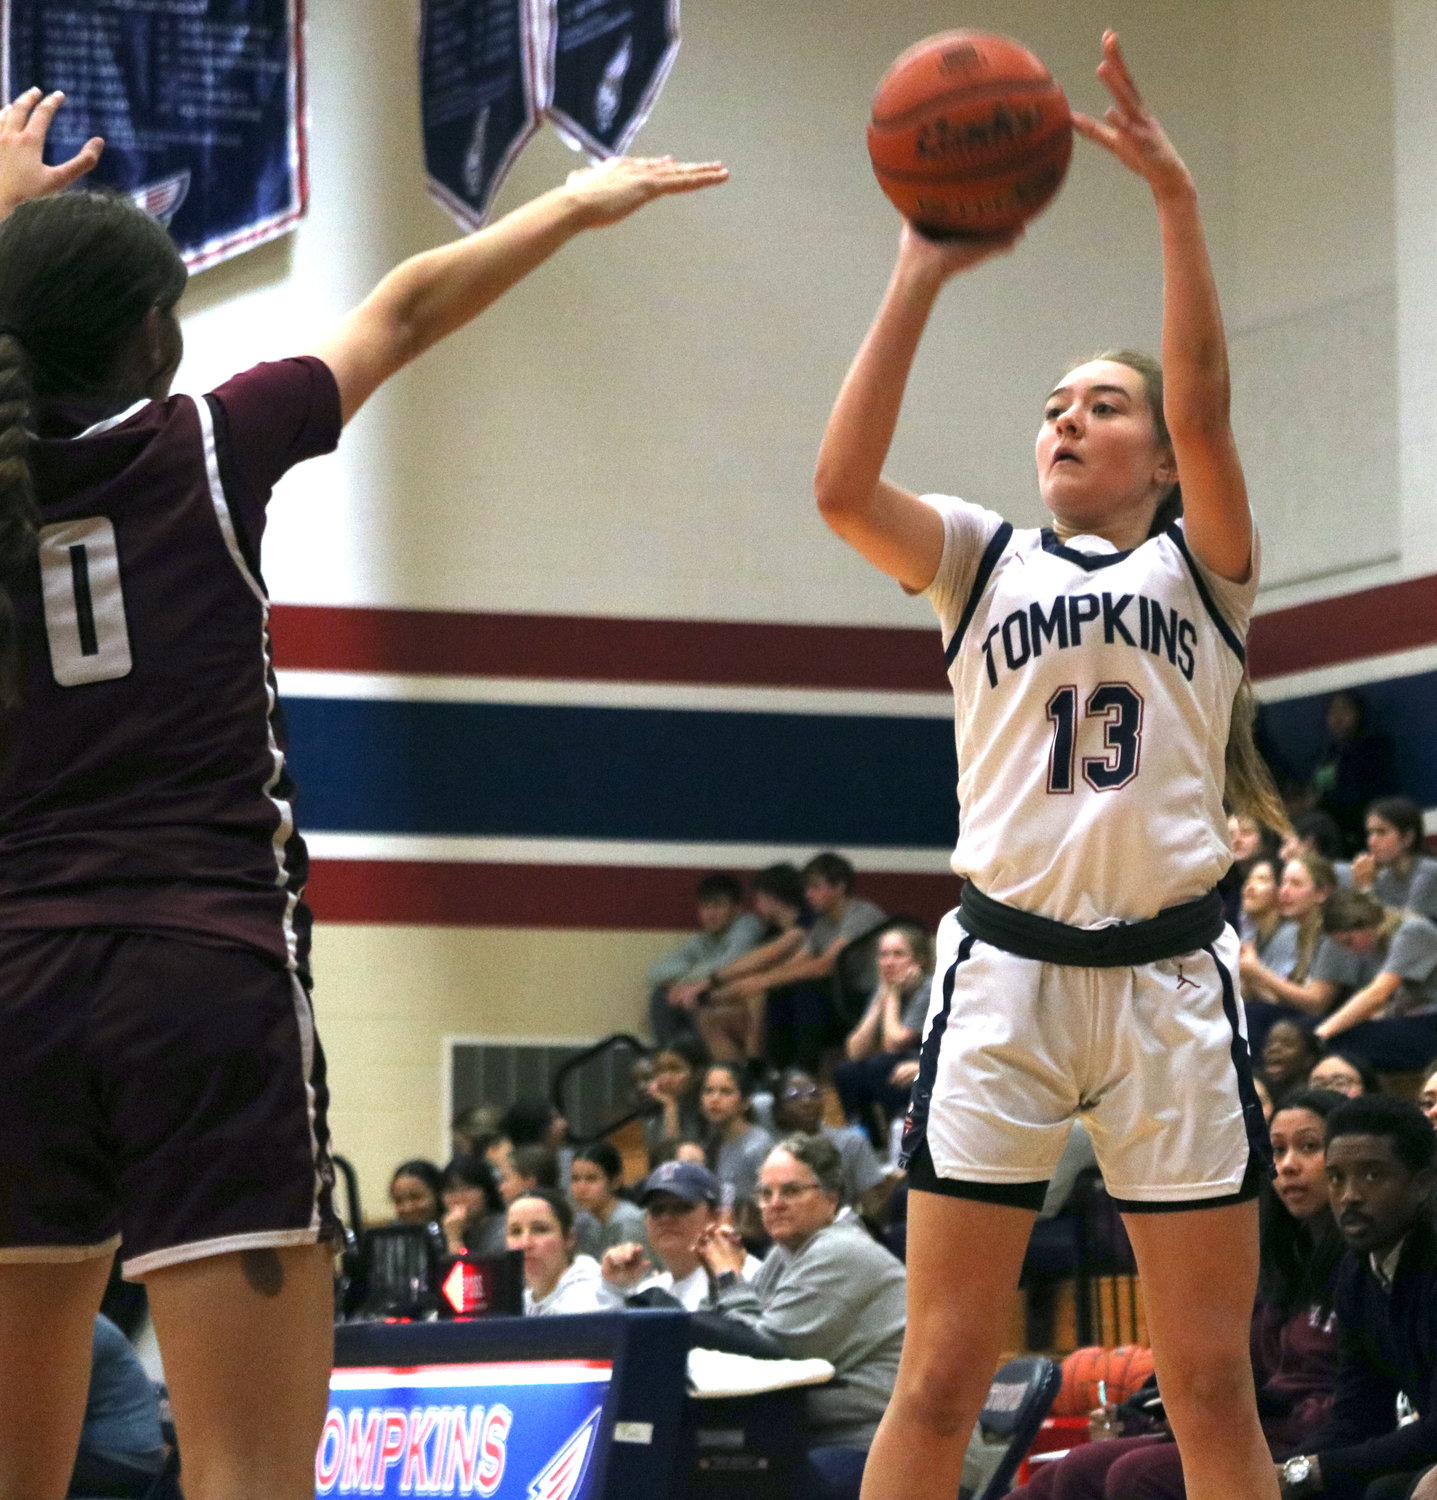 Macy Spencer shoots a jumpshot during Friday’s game between Tompkins and Cinco Ranch at the Tompkins gym.